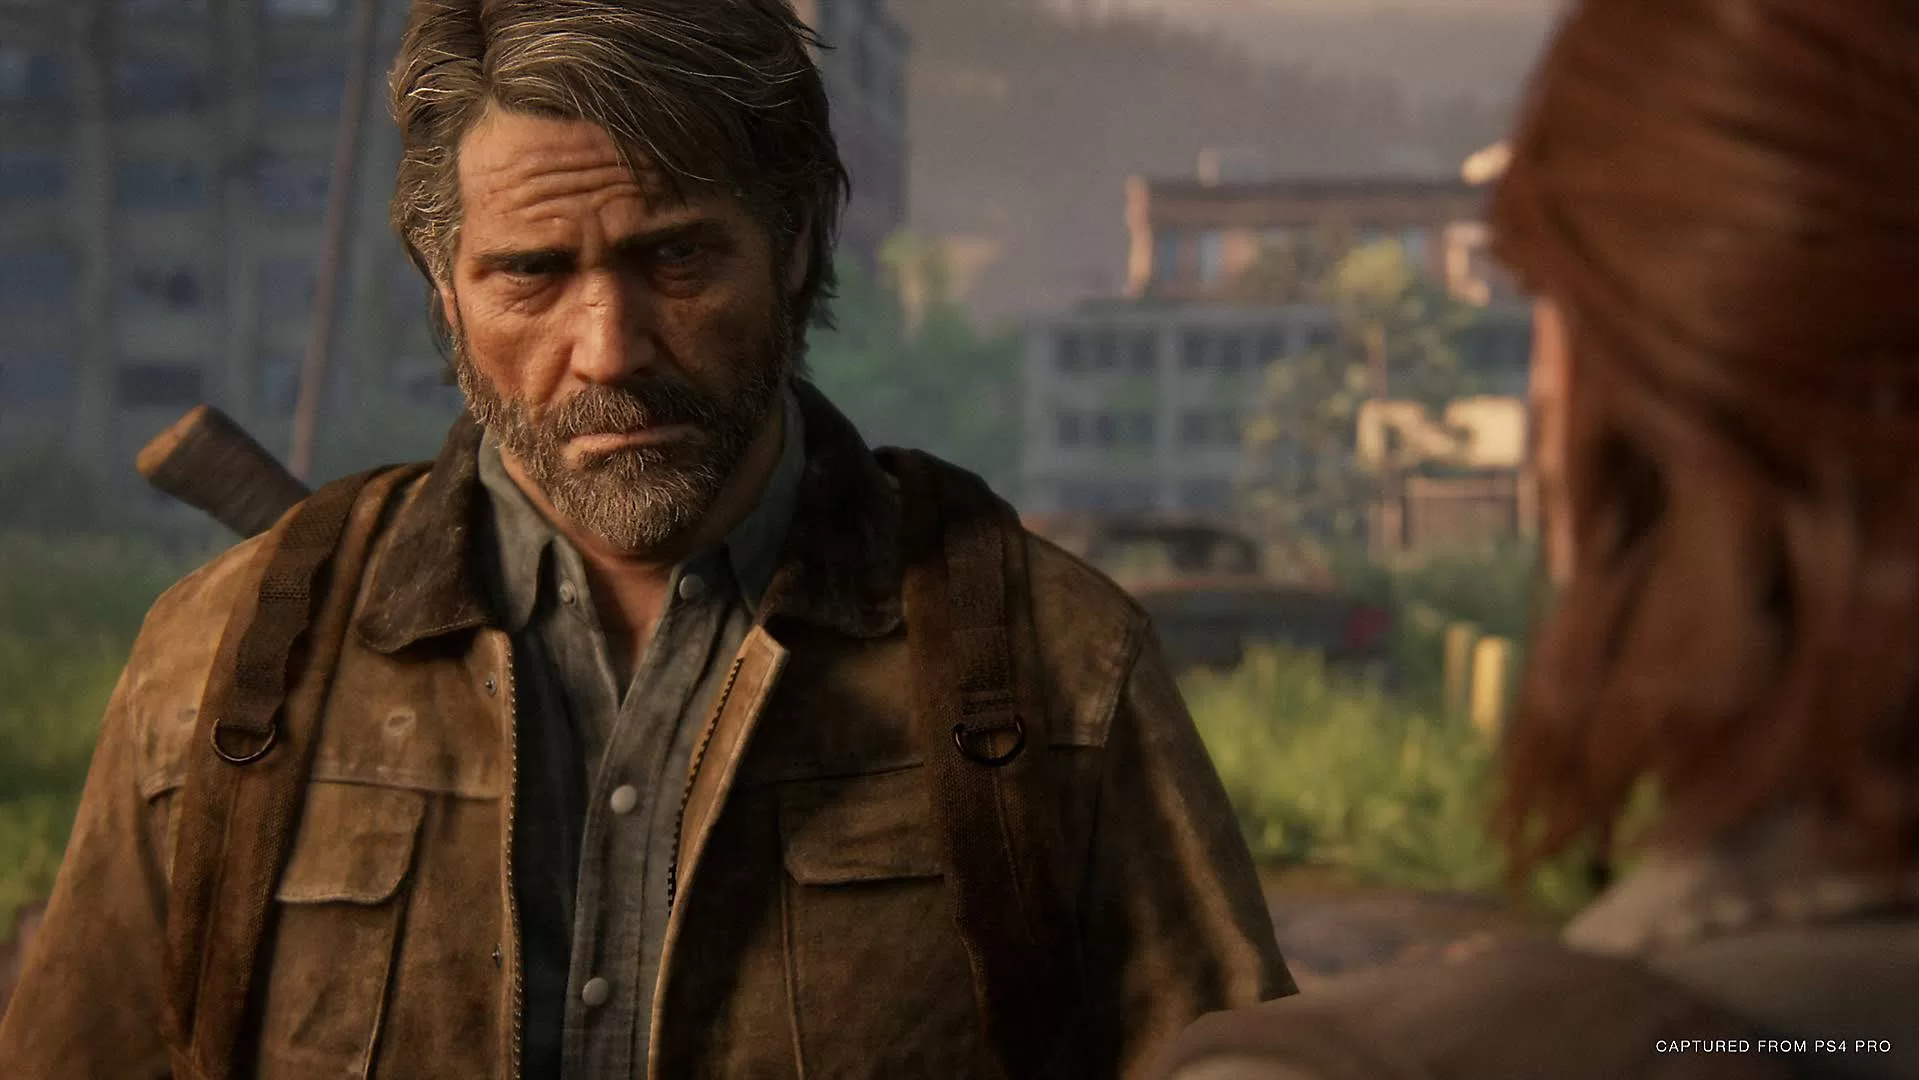 Was Joel the villain in The Last of Us? - Quora